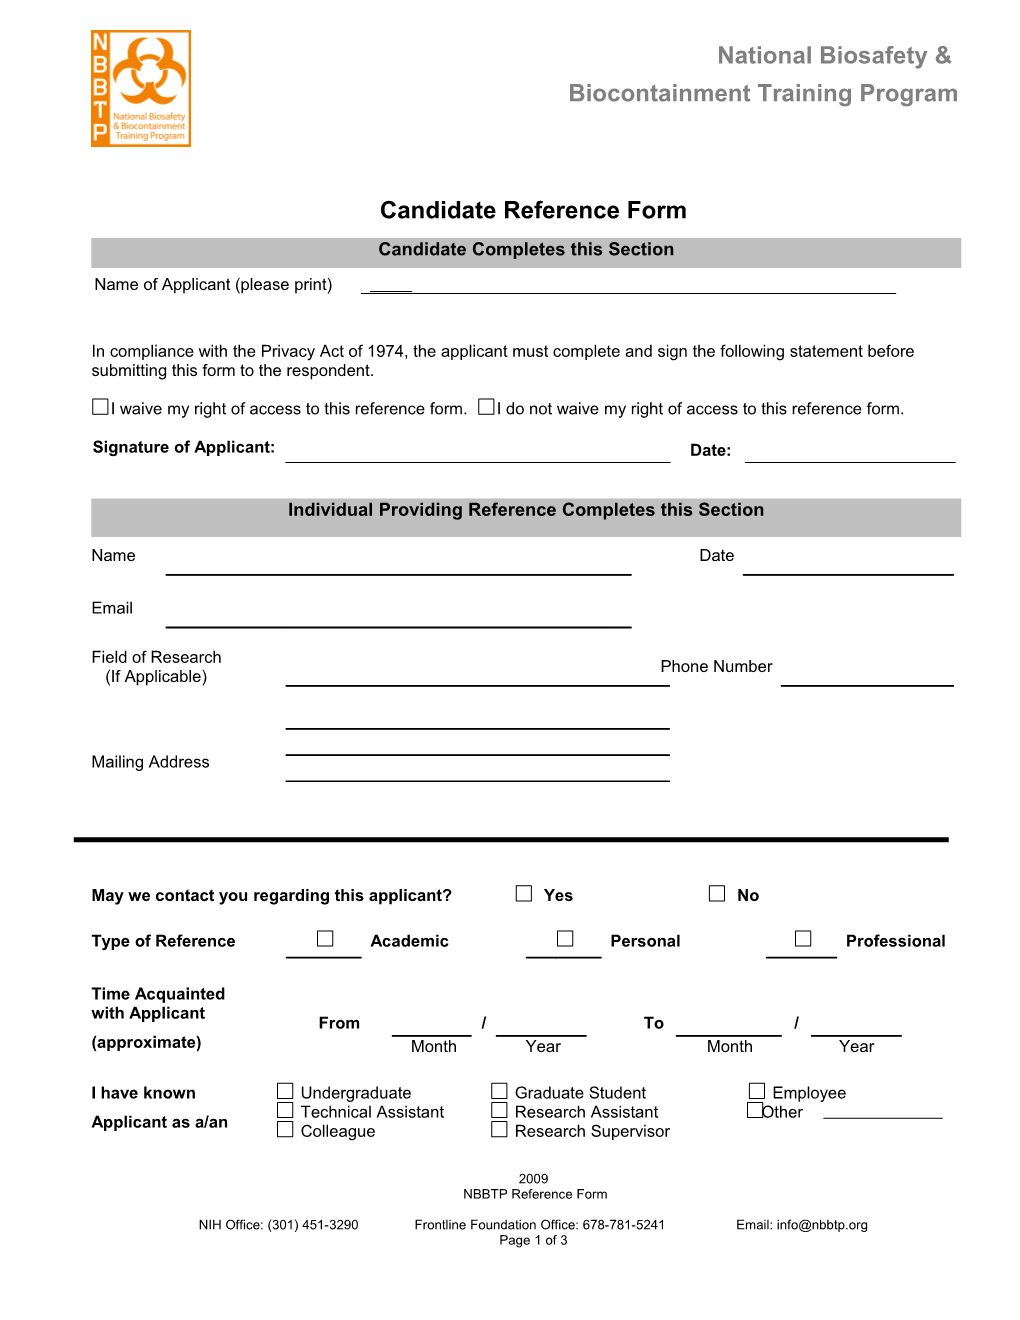 Candidate Reference Form